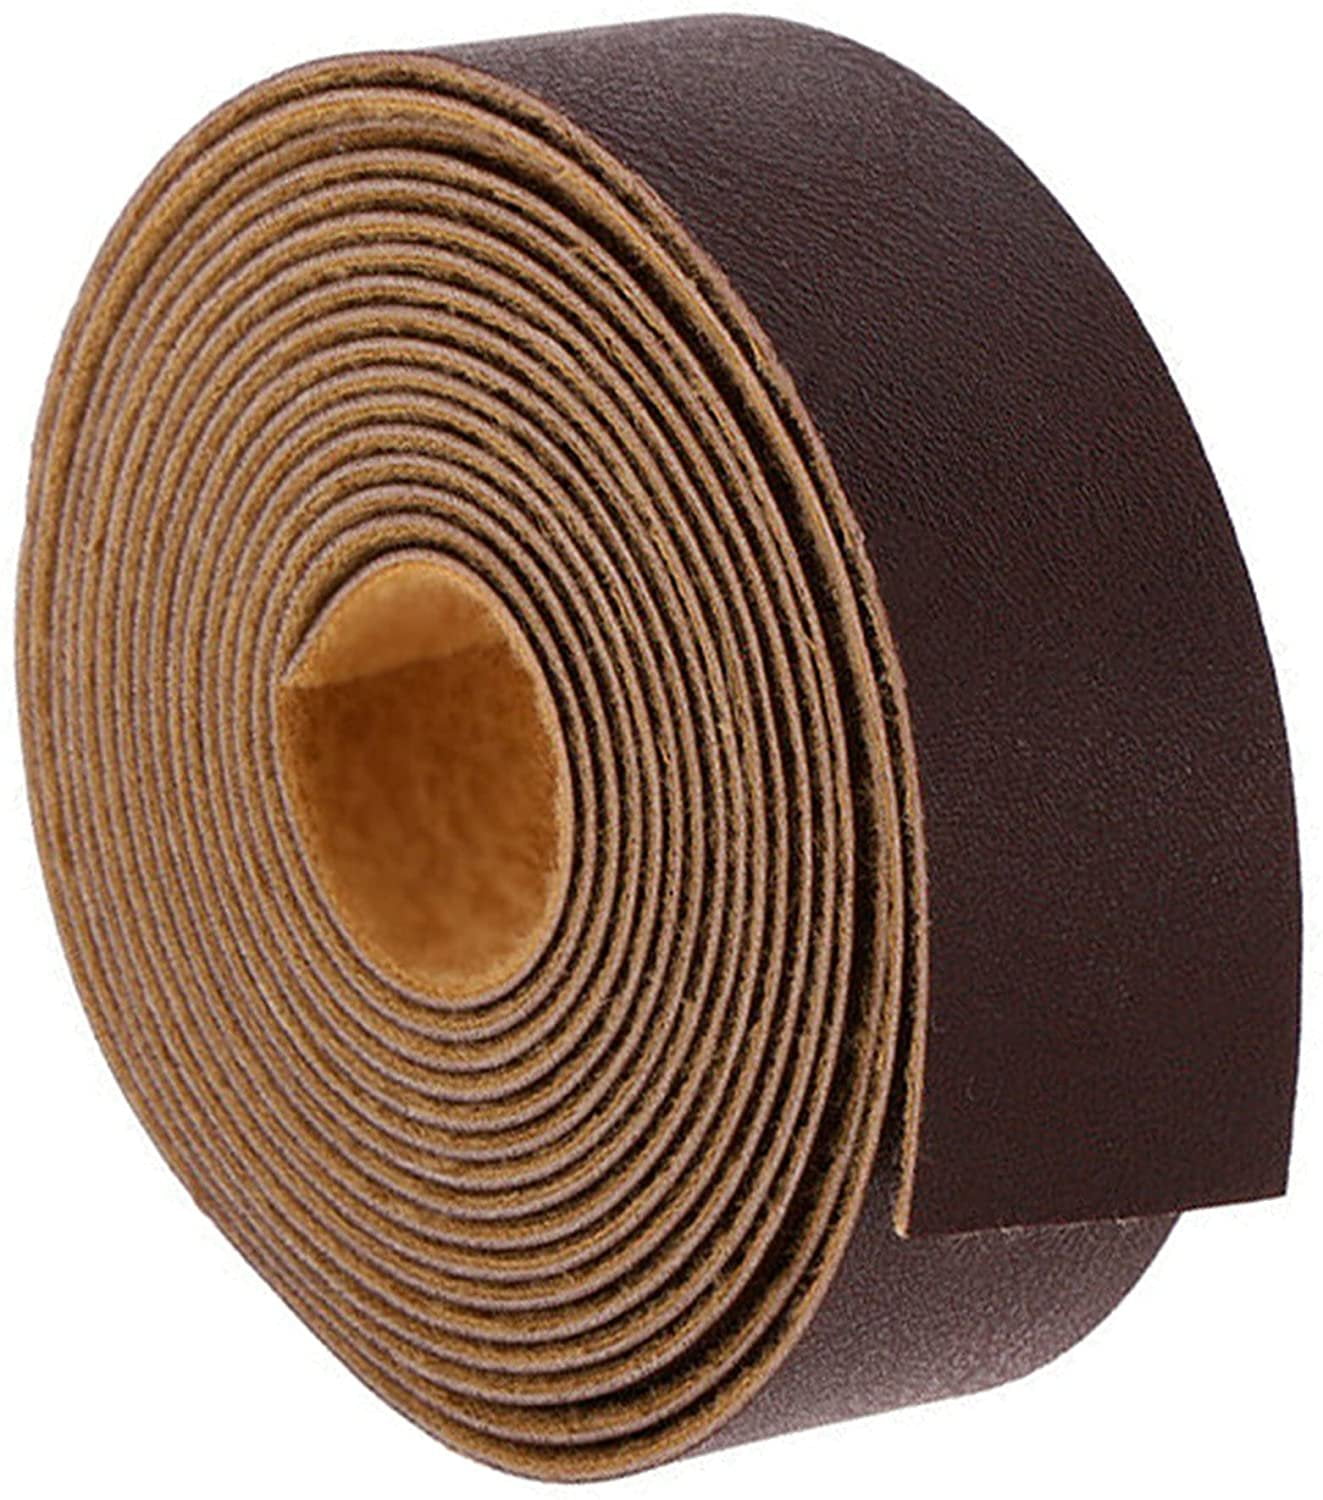 RAWHYD Full Grain Buffalo Leather Strip, Fine Brown Leather Straps Ideal  for Crafts DIY Belts, Bracelets, Jewelry, Key Chains and More (1.5 x 60)  